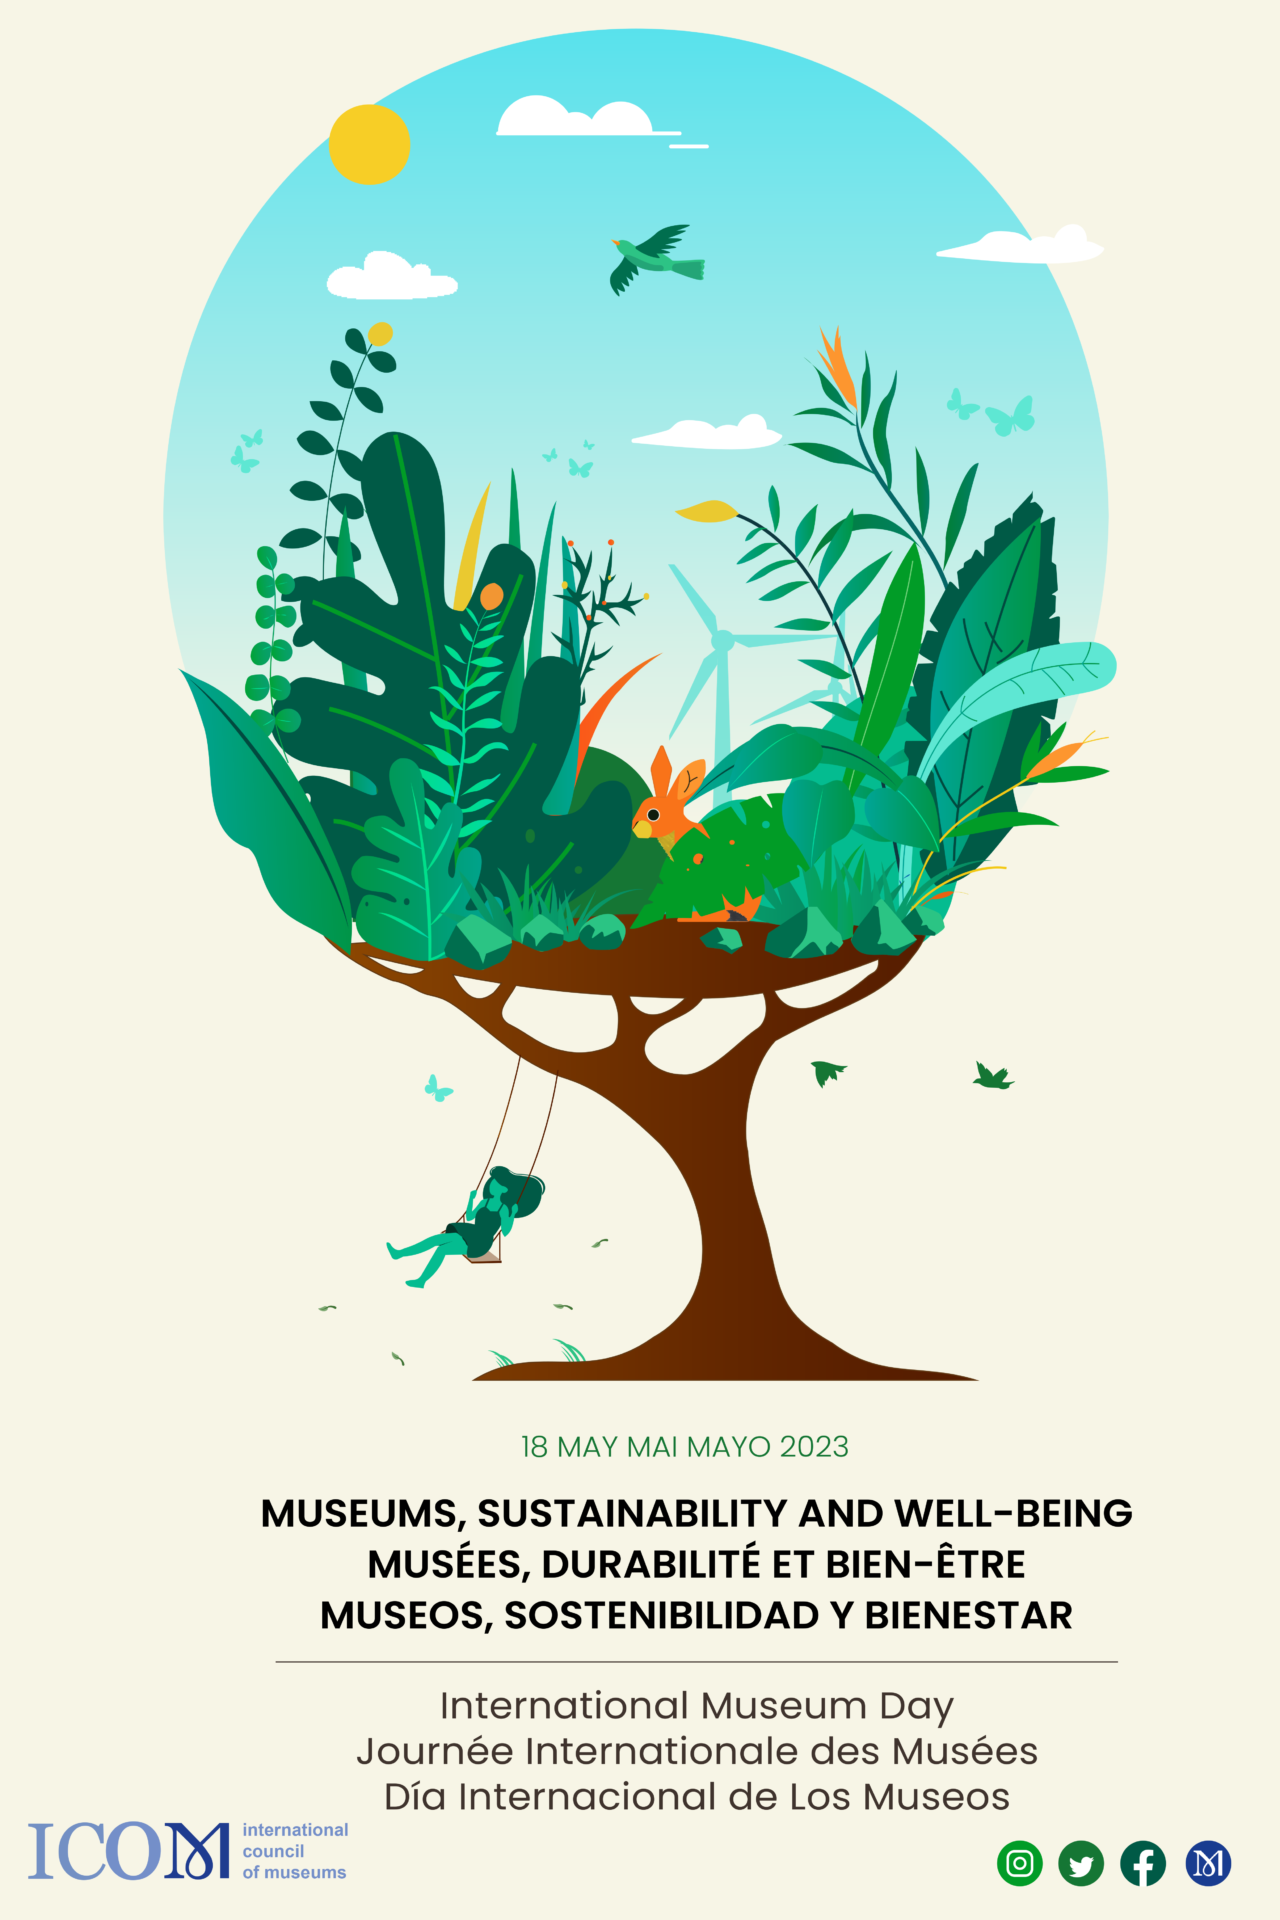 International Museum Day “Museum, sustainability and well-being” 18th May